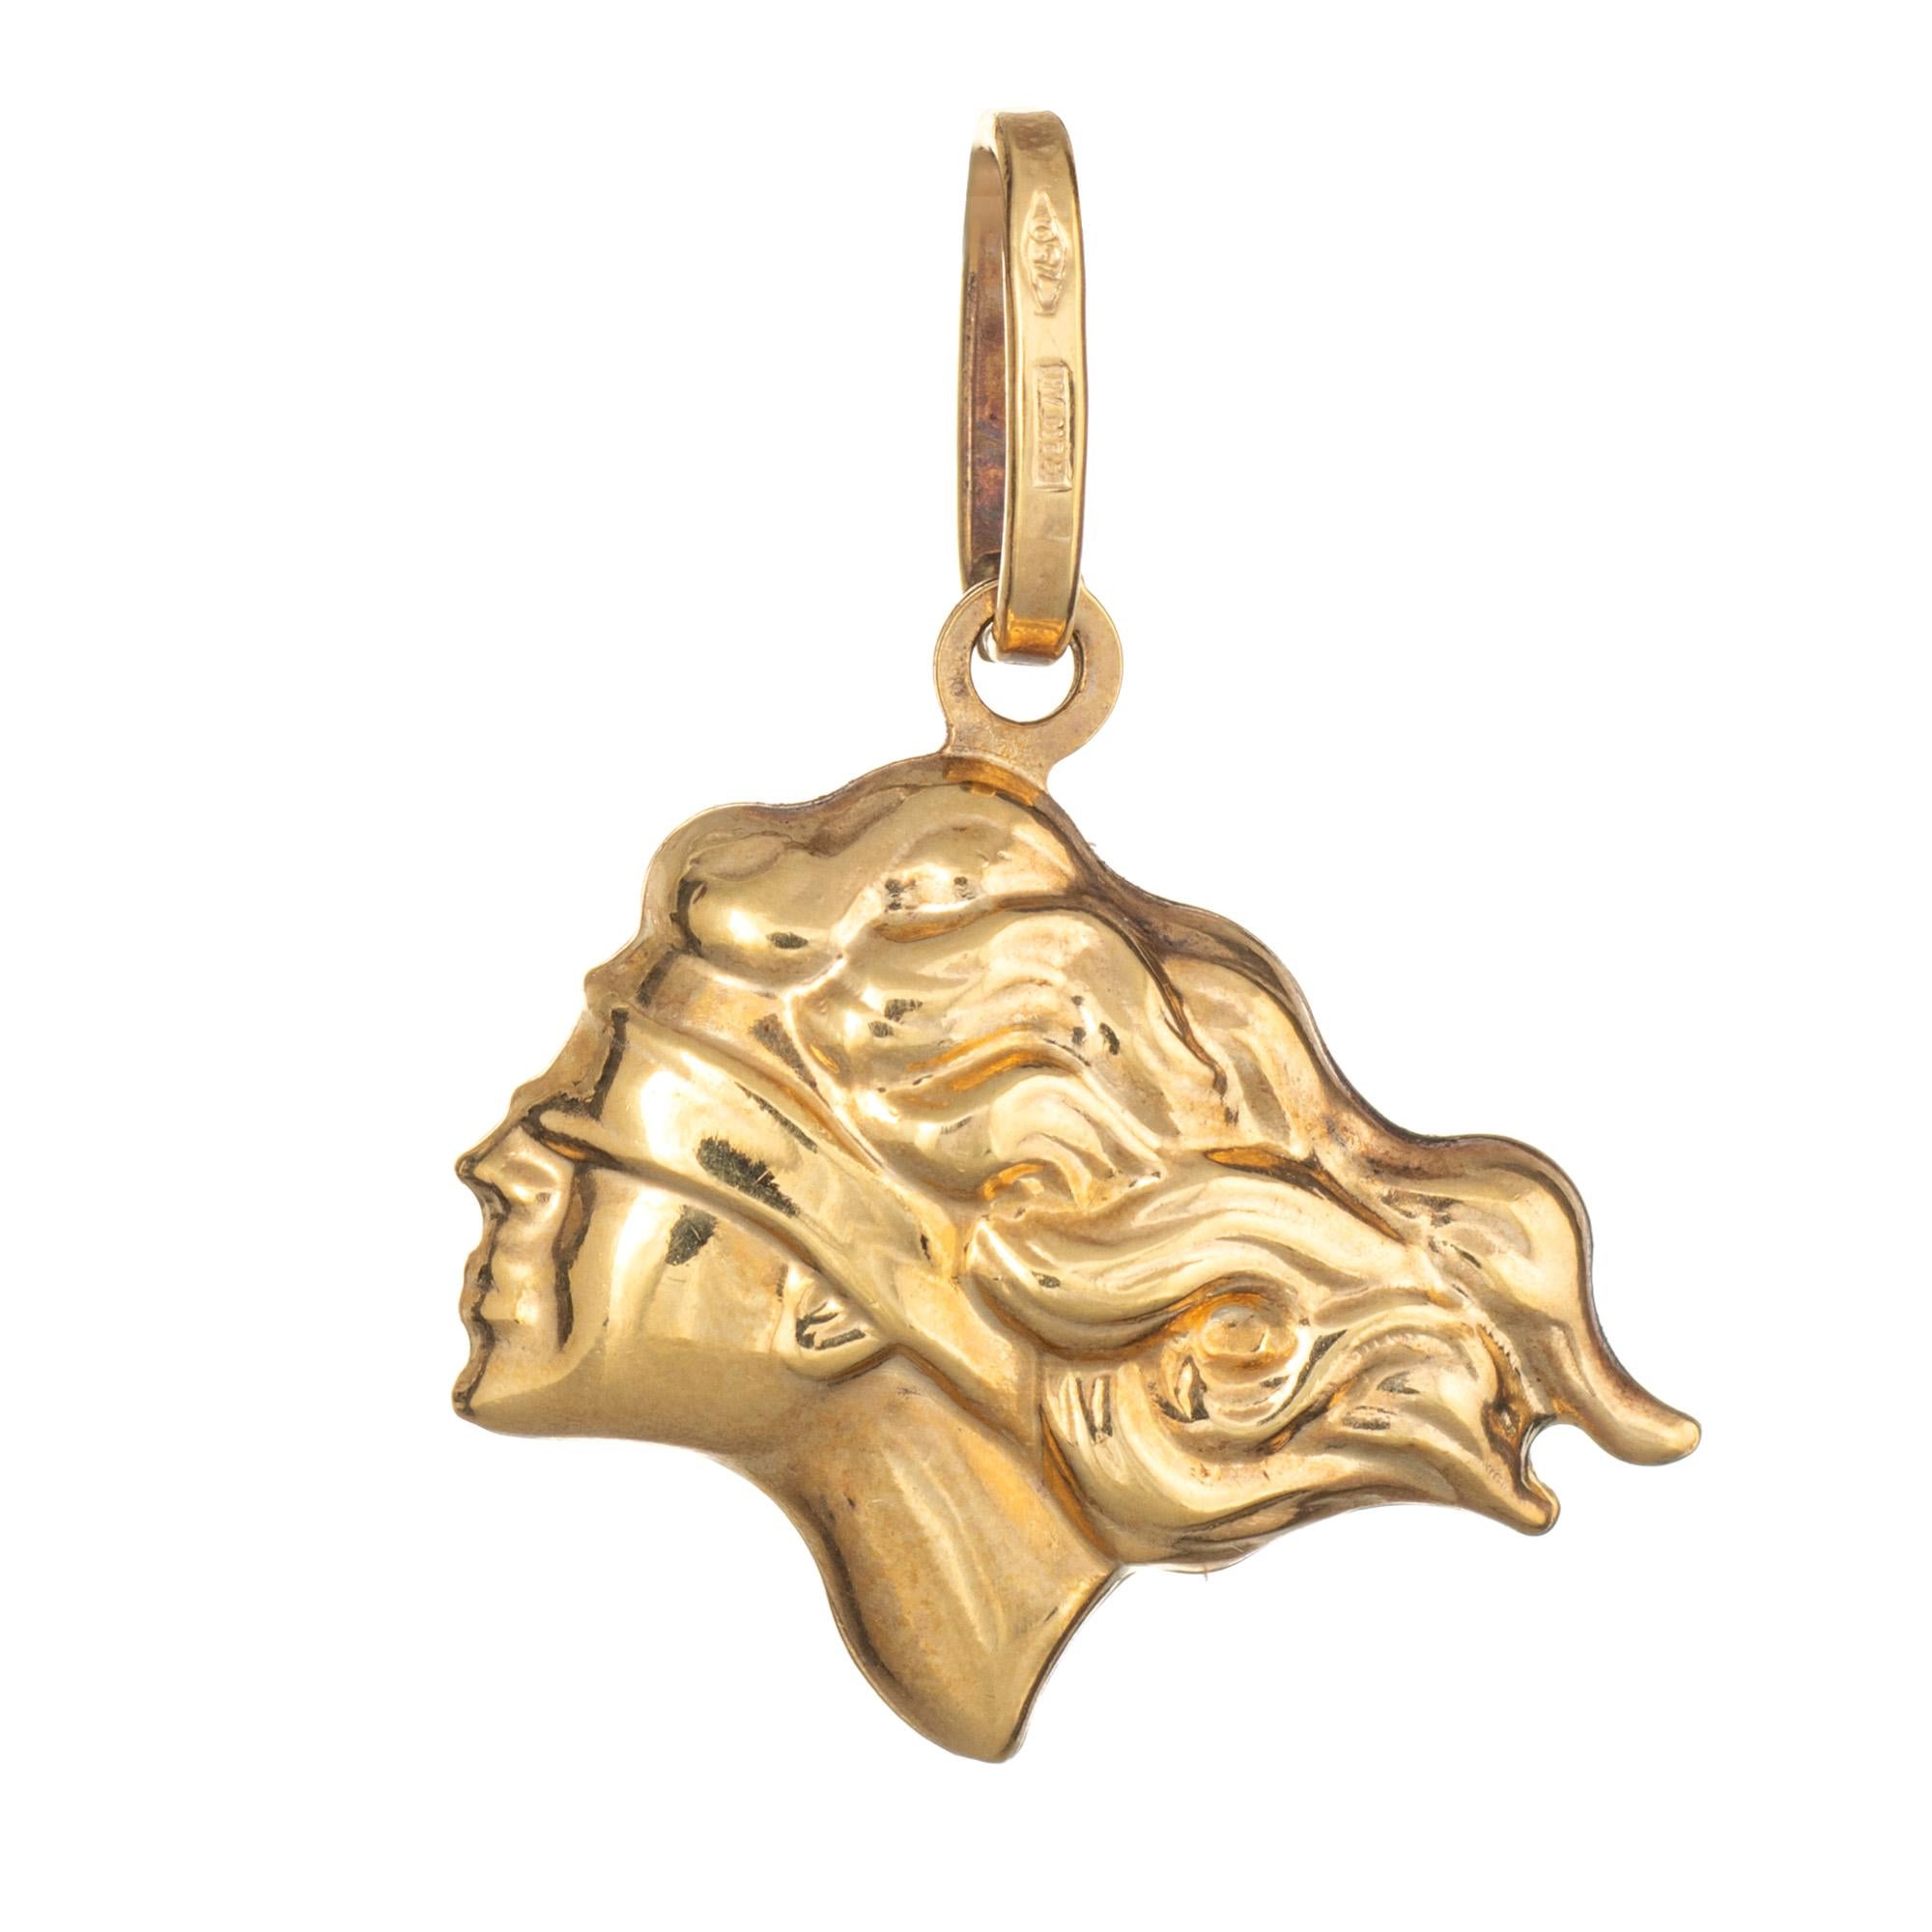 Finely detailed Lady Justice blindfolded charm (or pendant) crafted in 18k yellow gold.  

The nicely detailed charm is small in scale and features a blindfolded Lady Justice. The charm is hollow and has a lightweight feel. The piece can be worn on